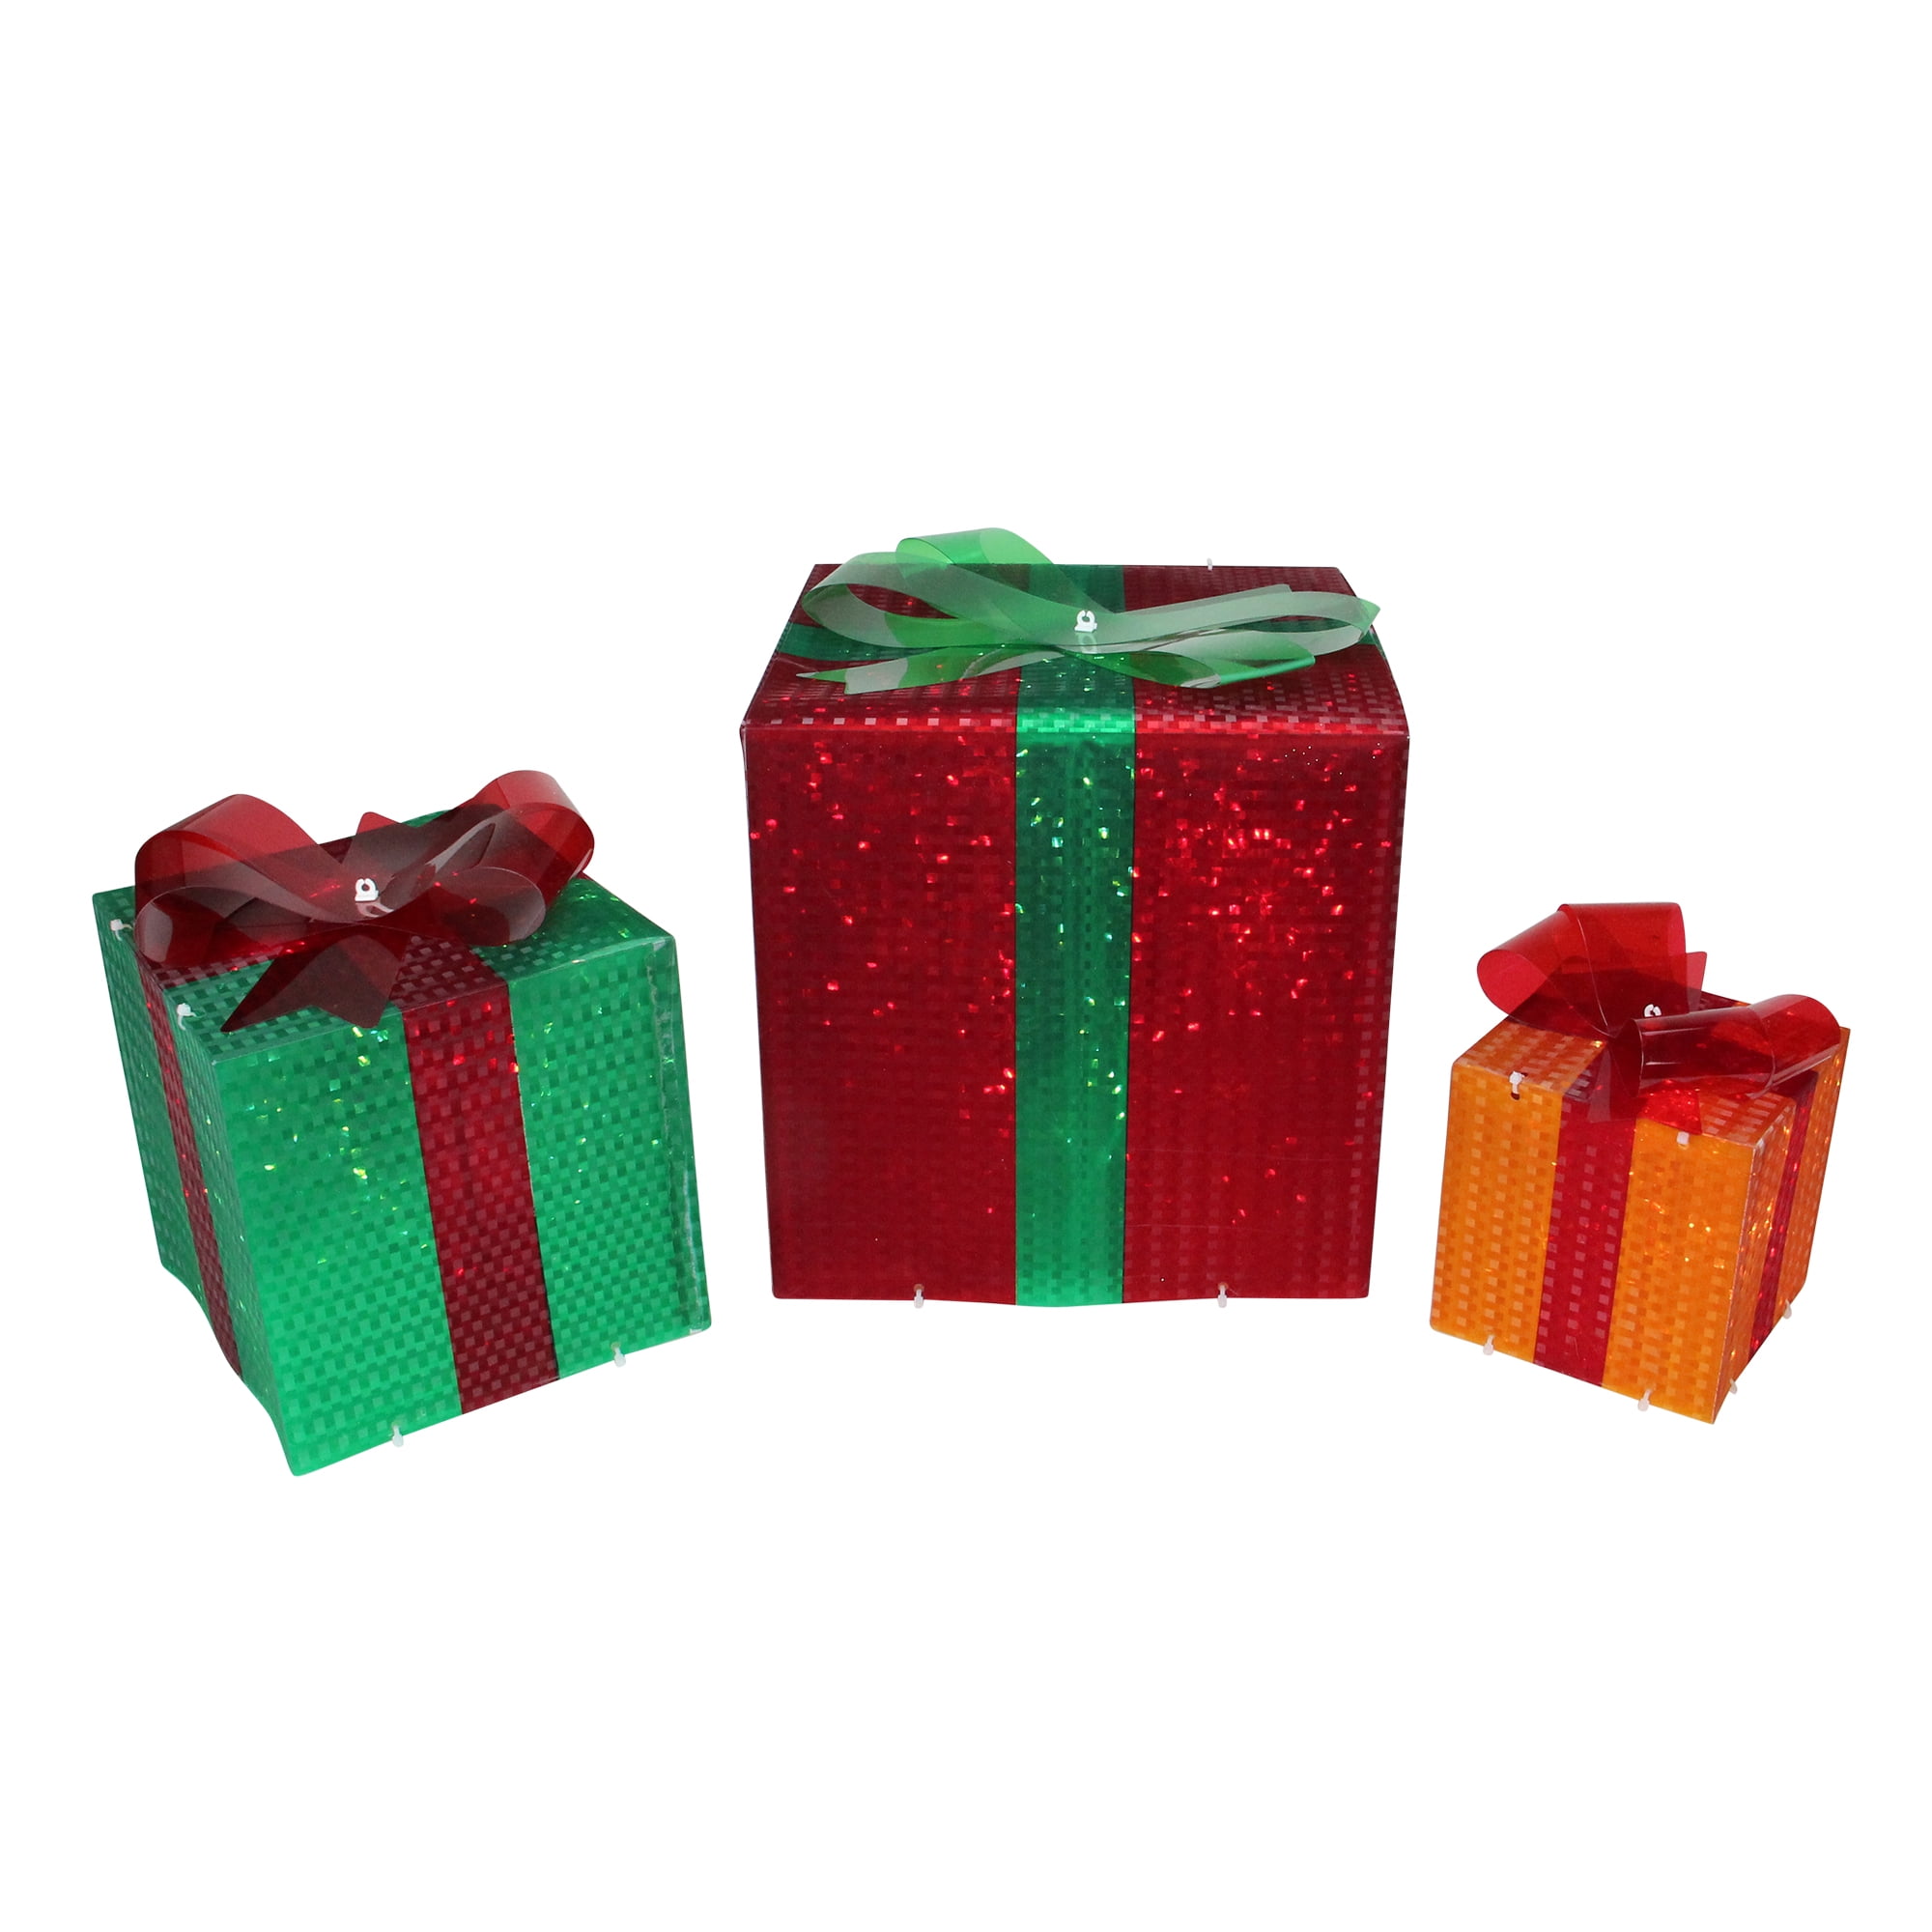 Homegear Christmas Set of 3 Pre-lit Gift Present Boxes with 60 LED Lights 